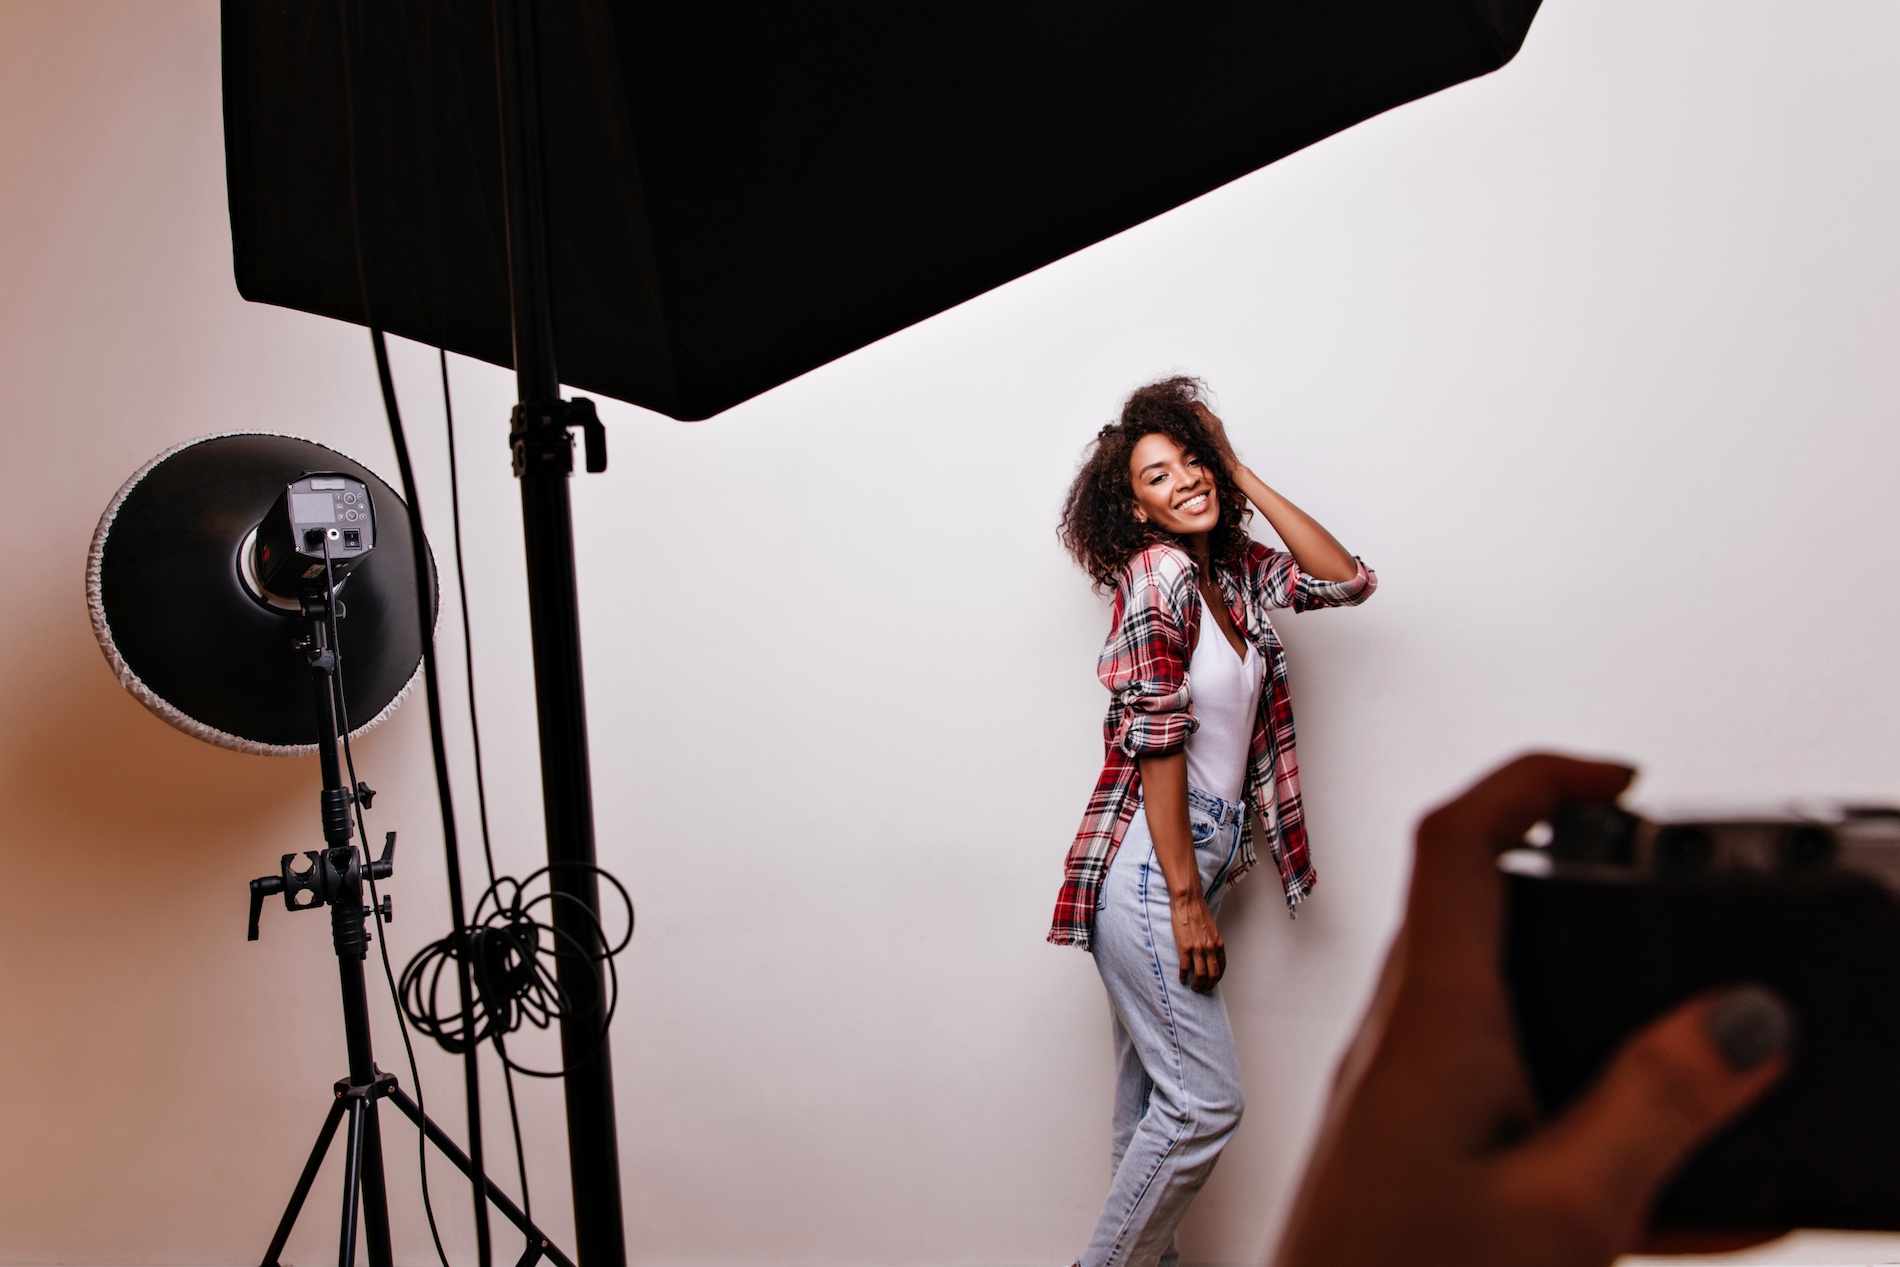 Model Photoshoots: How to Prepare & What to Expect